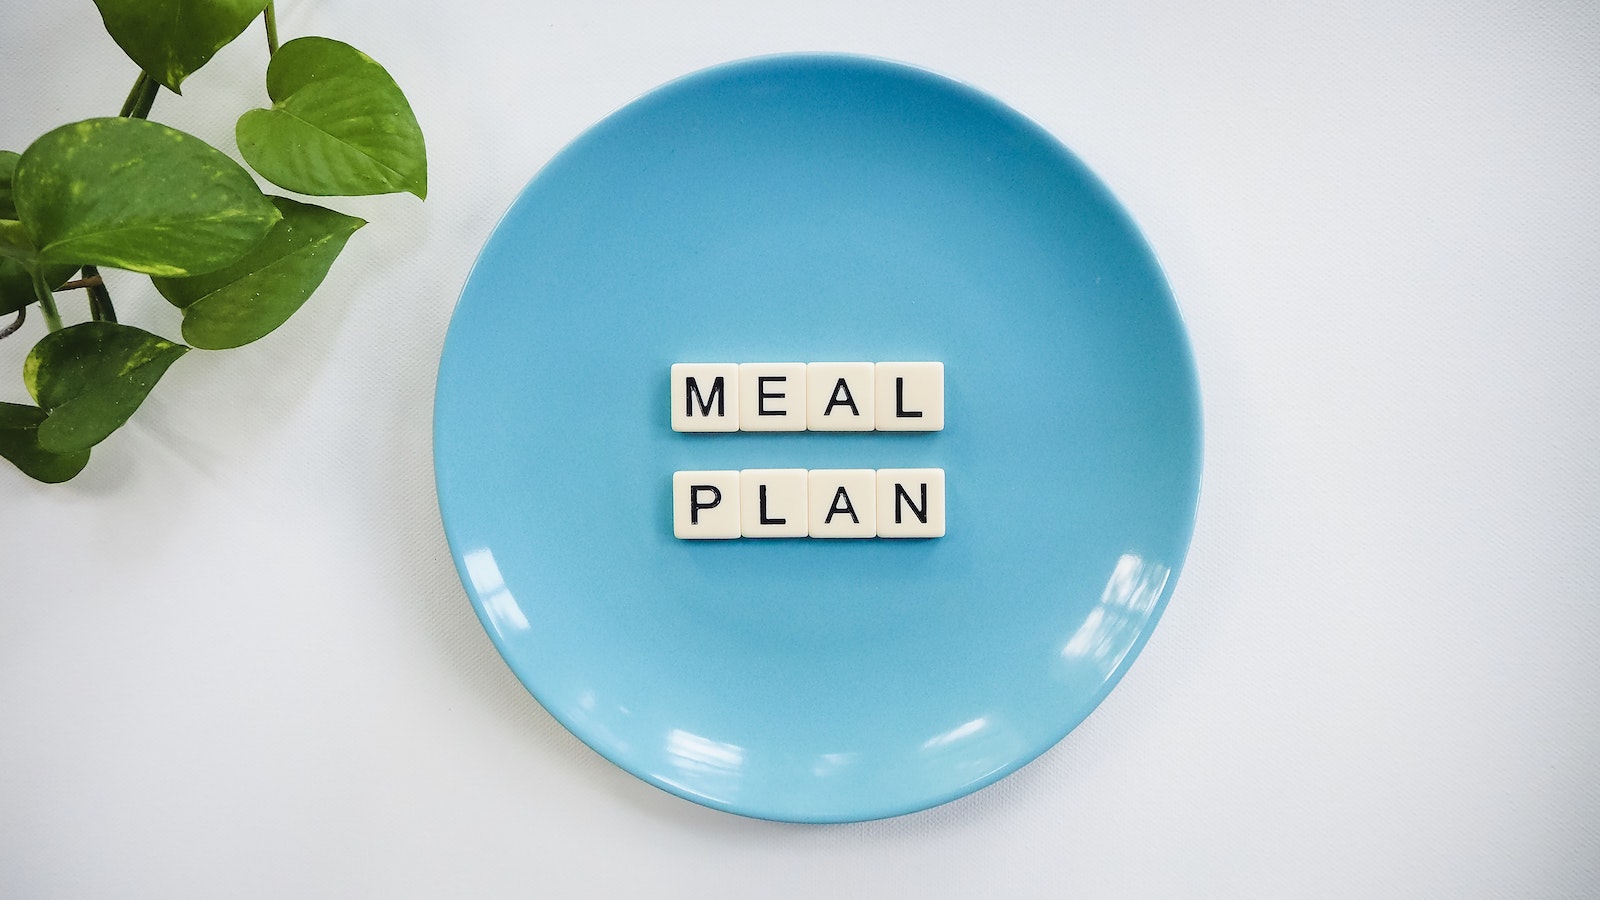 Without gym weight loss meal planning